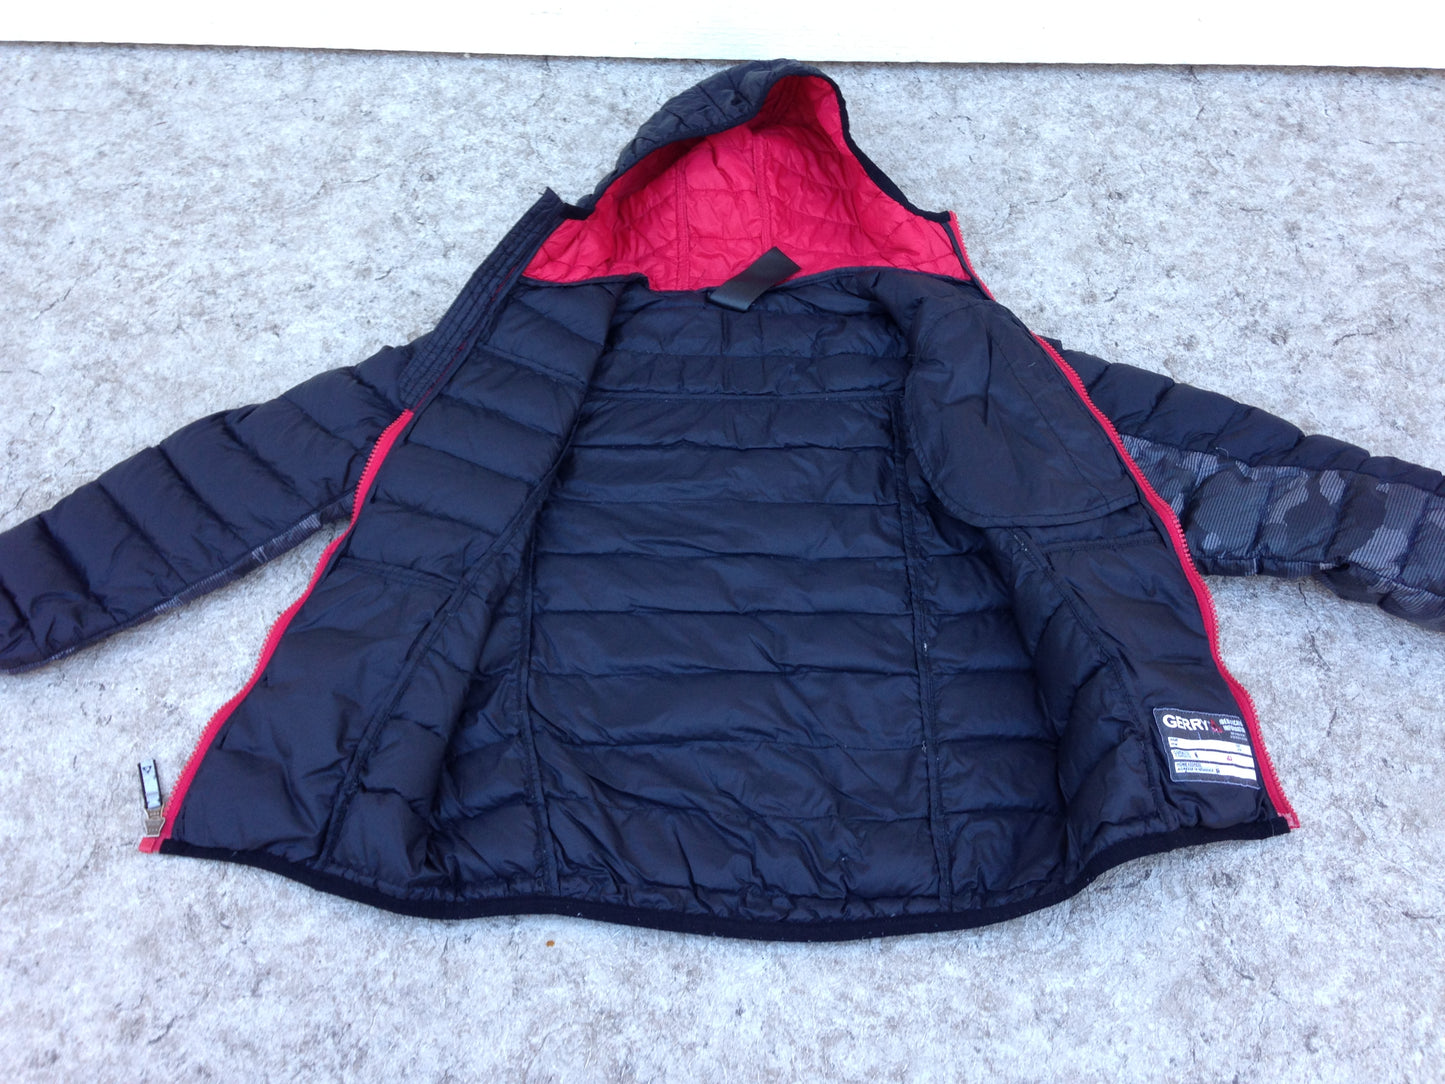 Winter Coat Child Size 7-8 Gerry Feather Down Filled Poly Jacket Black Red Grey